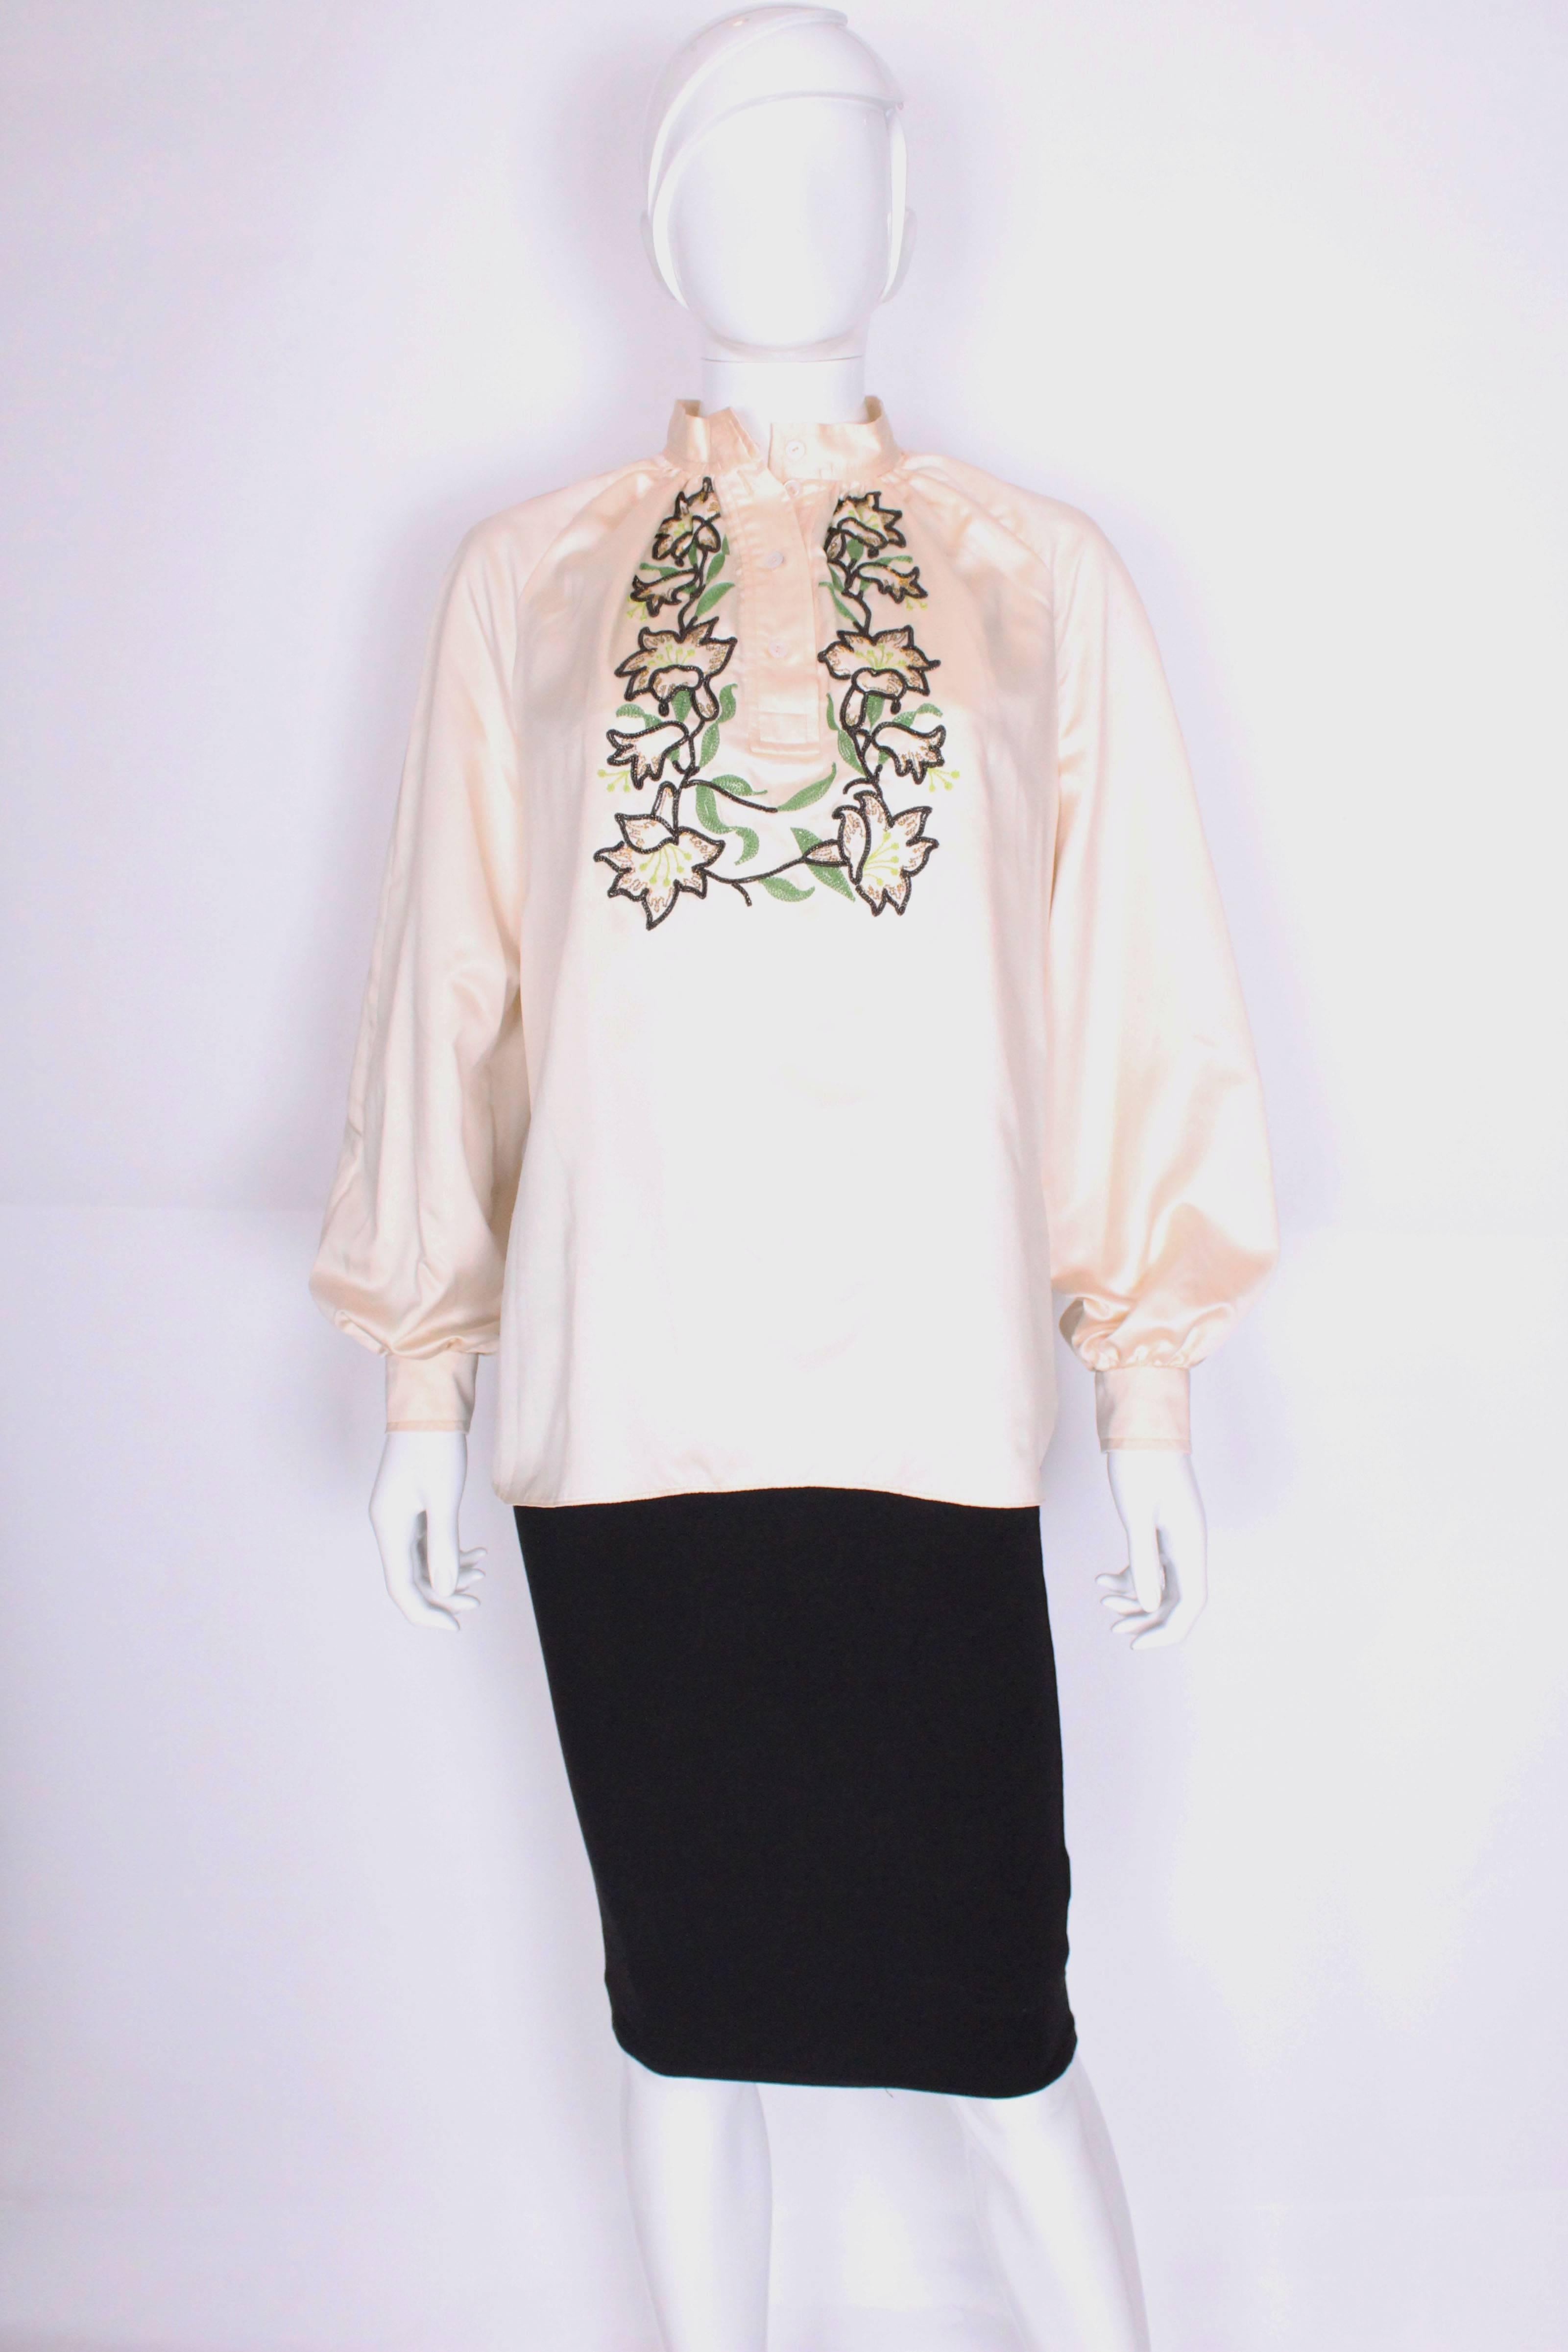 An elegant and easy to wear blouse by British designer Caroline Charles. In a lovely ivory colour, this blouse has a mandarin collar, with a 4 button opening. There is floral embroidery detail on the front in browns and greens. The cuffs are have a